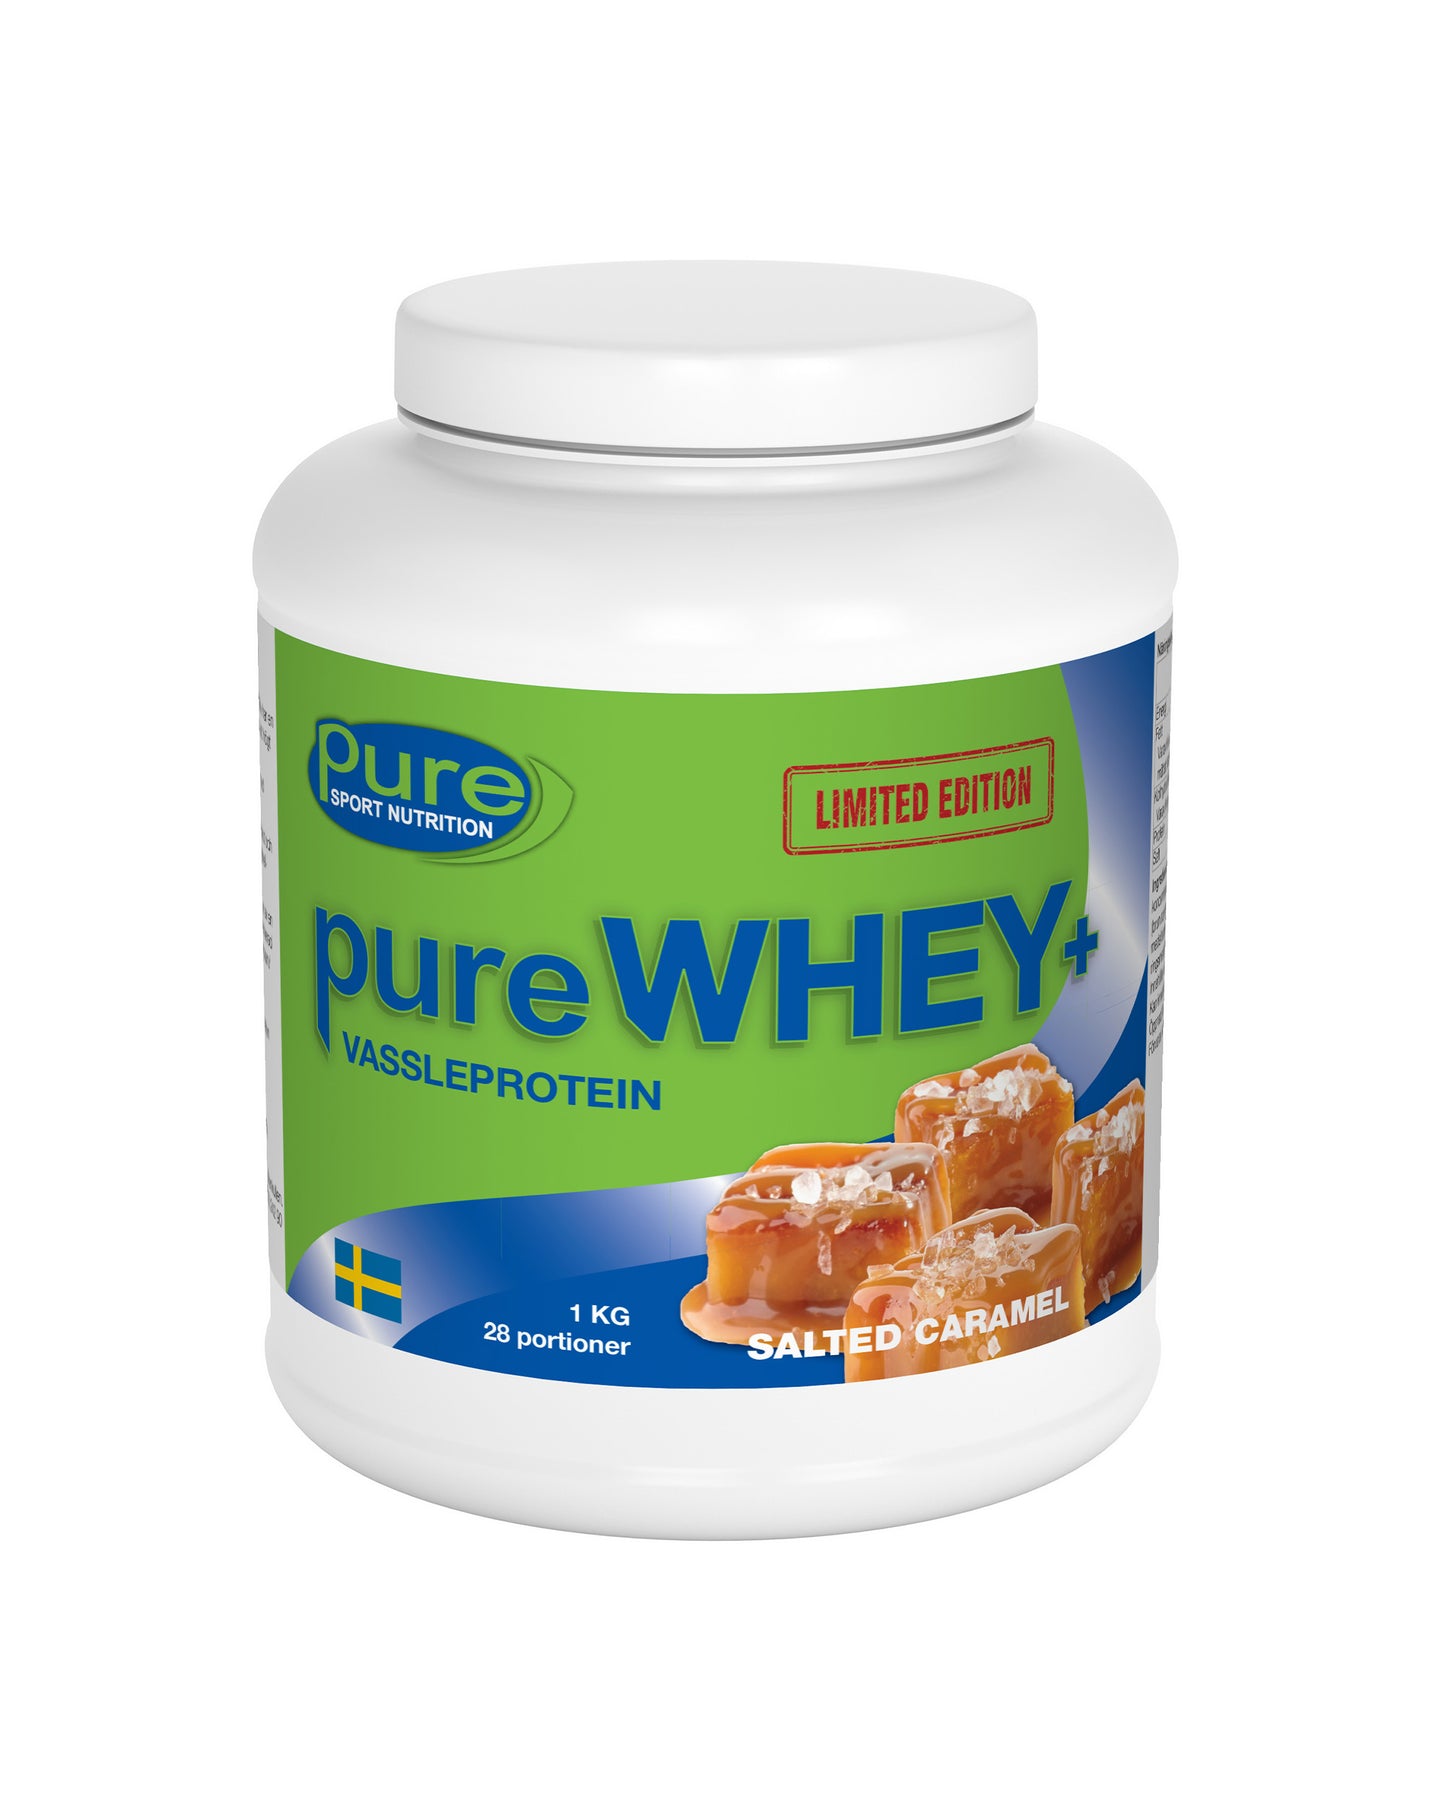 pure WHEY+ Salted Caramel